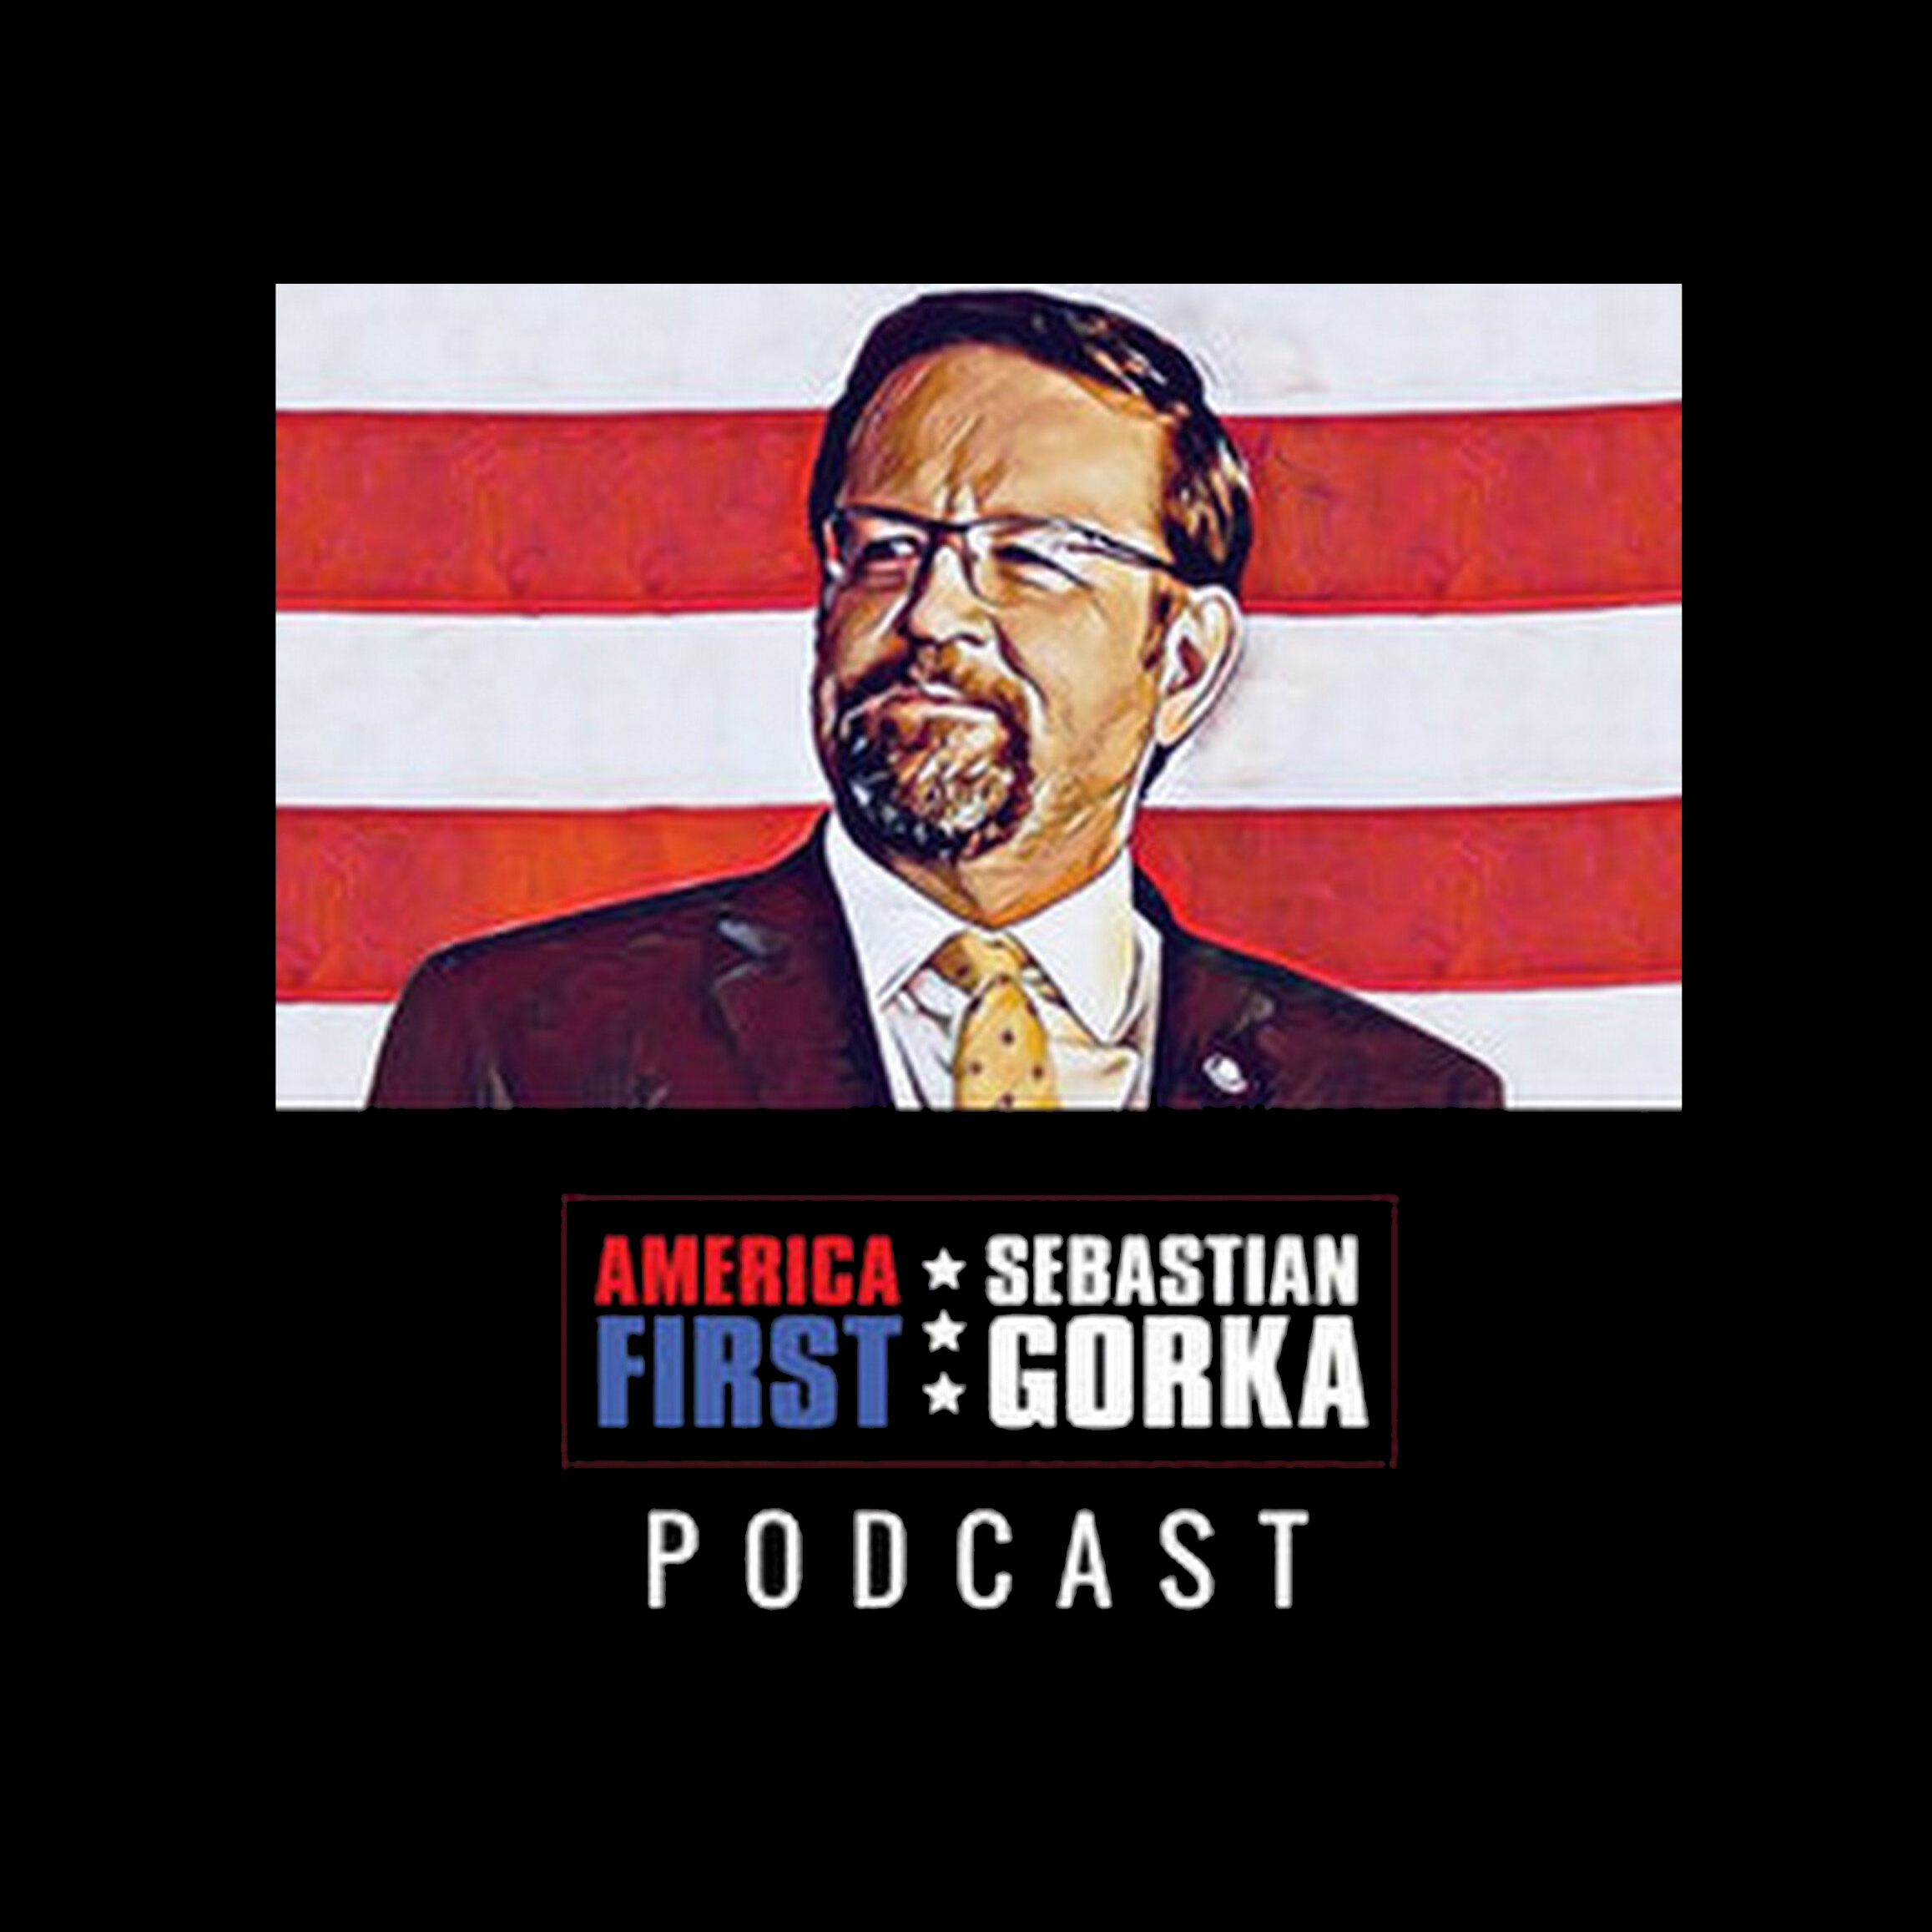 Time for civil disobedience. Joe Piscopo with Sebastian Gorka on AMERICA First